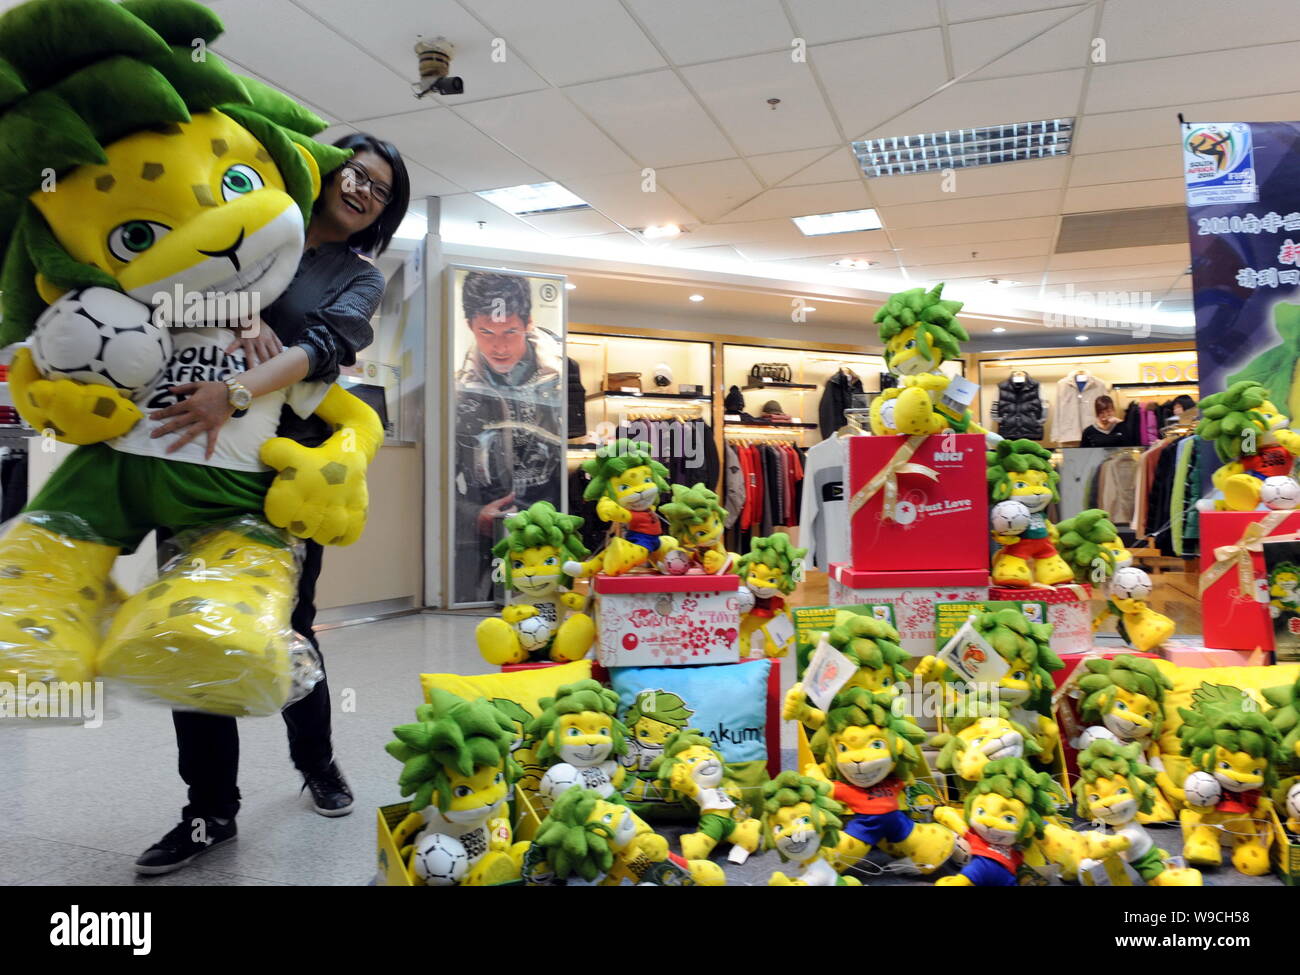 Toys of Zakumi, the official mascot of 2010 FIFA World Cup South Africa, are seen for sale at a department store in Beijing, China, November 17, 2009. Stock Photo